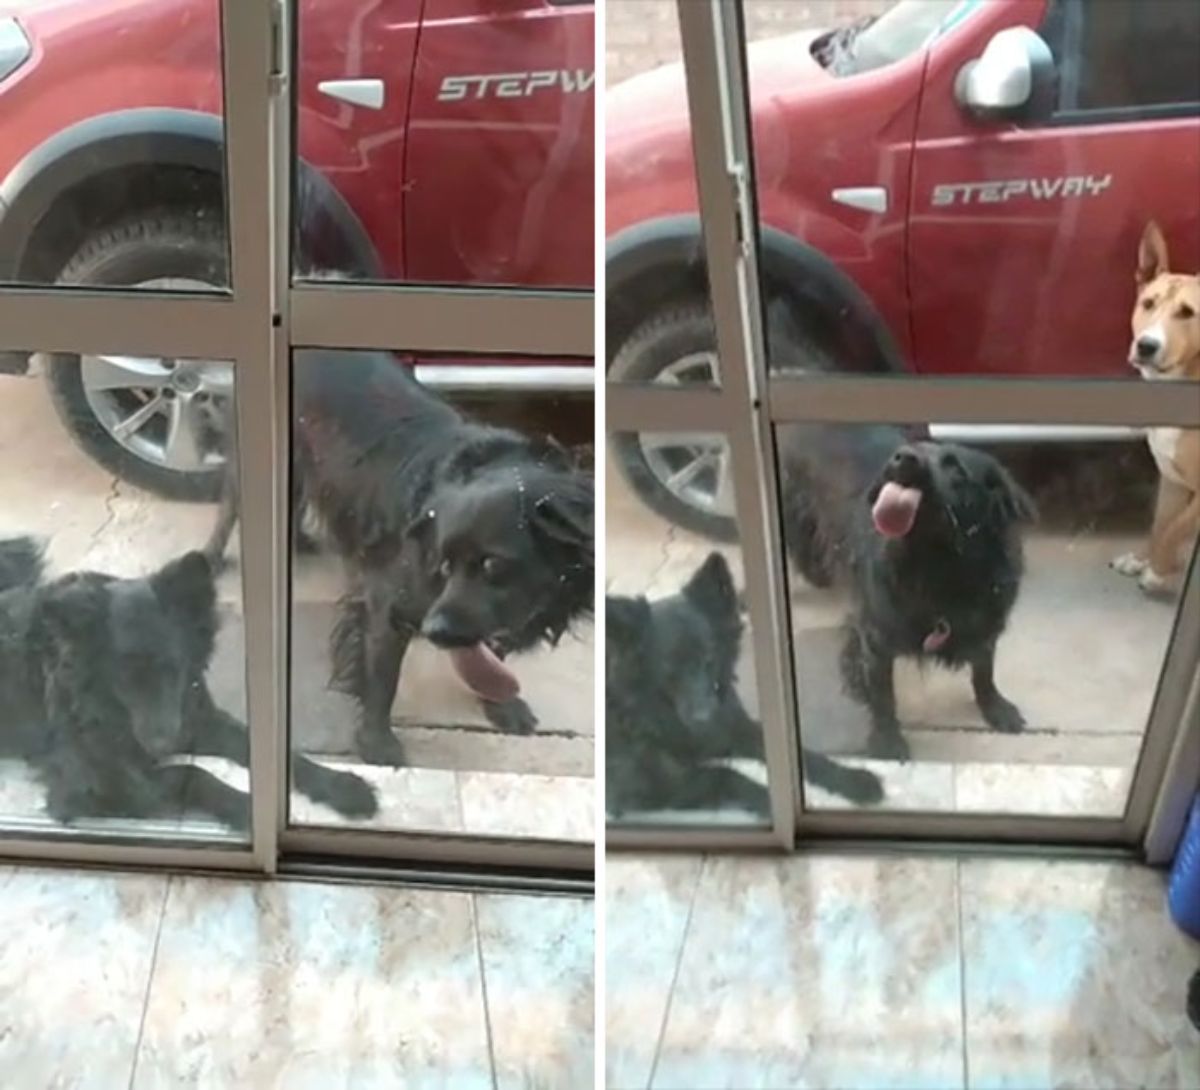 2 photos of a black dog licking a glass door while a black dog lays on the floor next to it and a brown and dog and a red truck is behind them